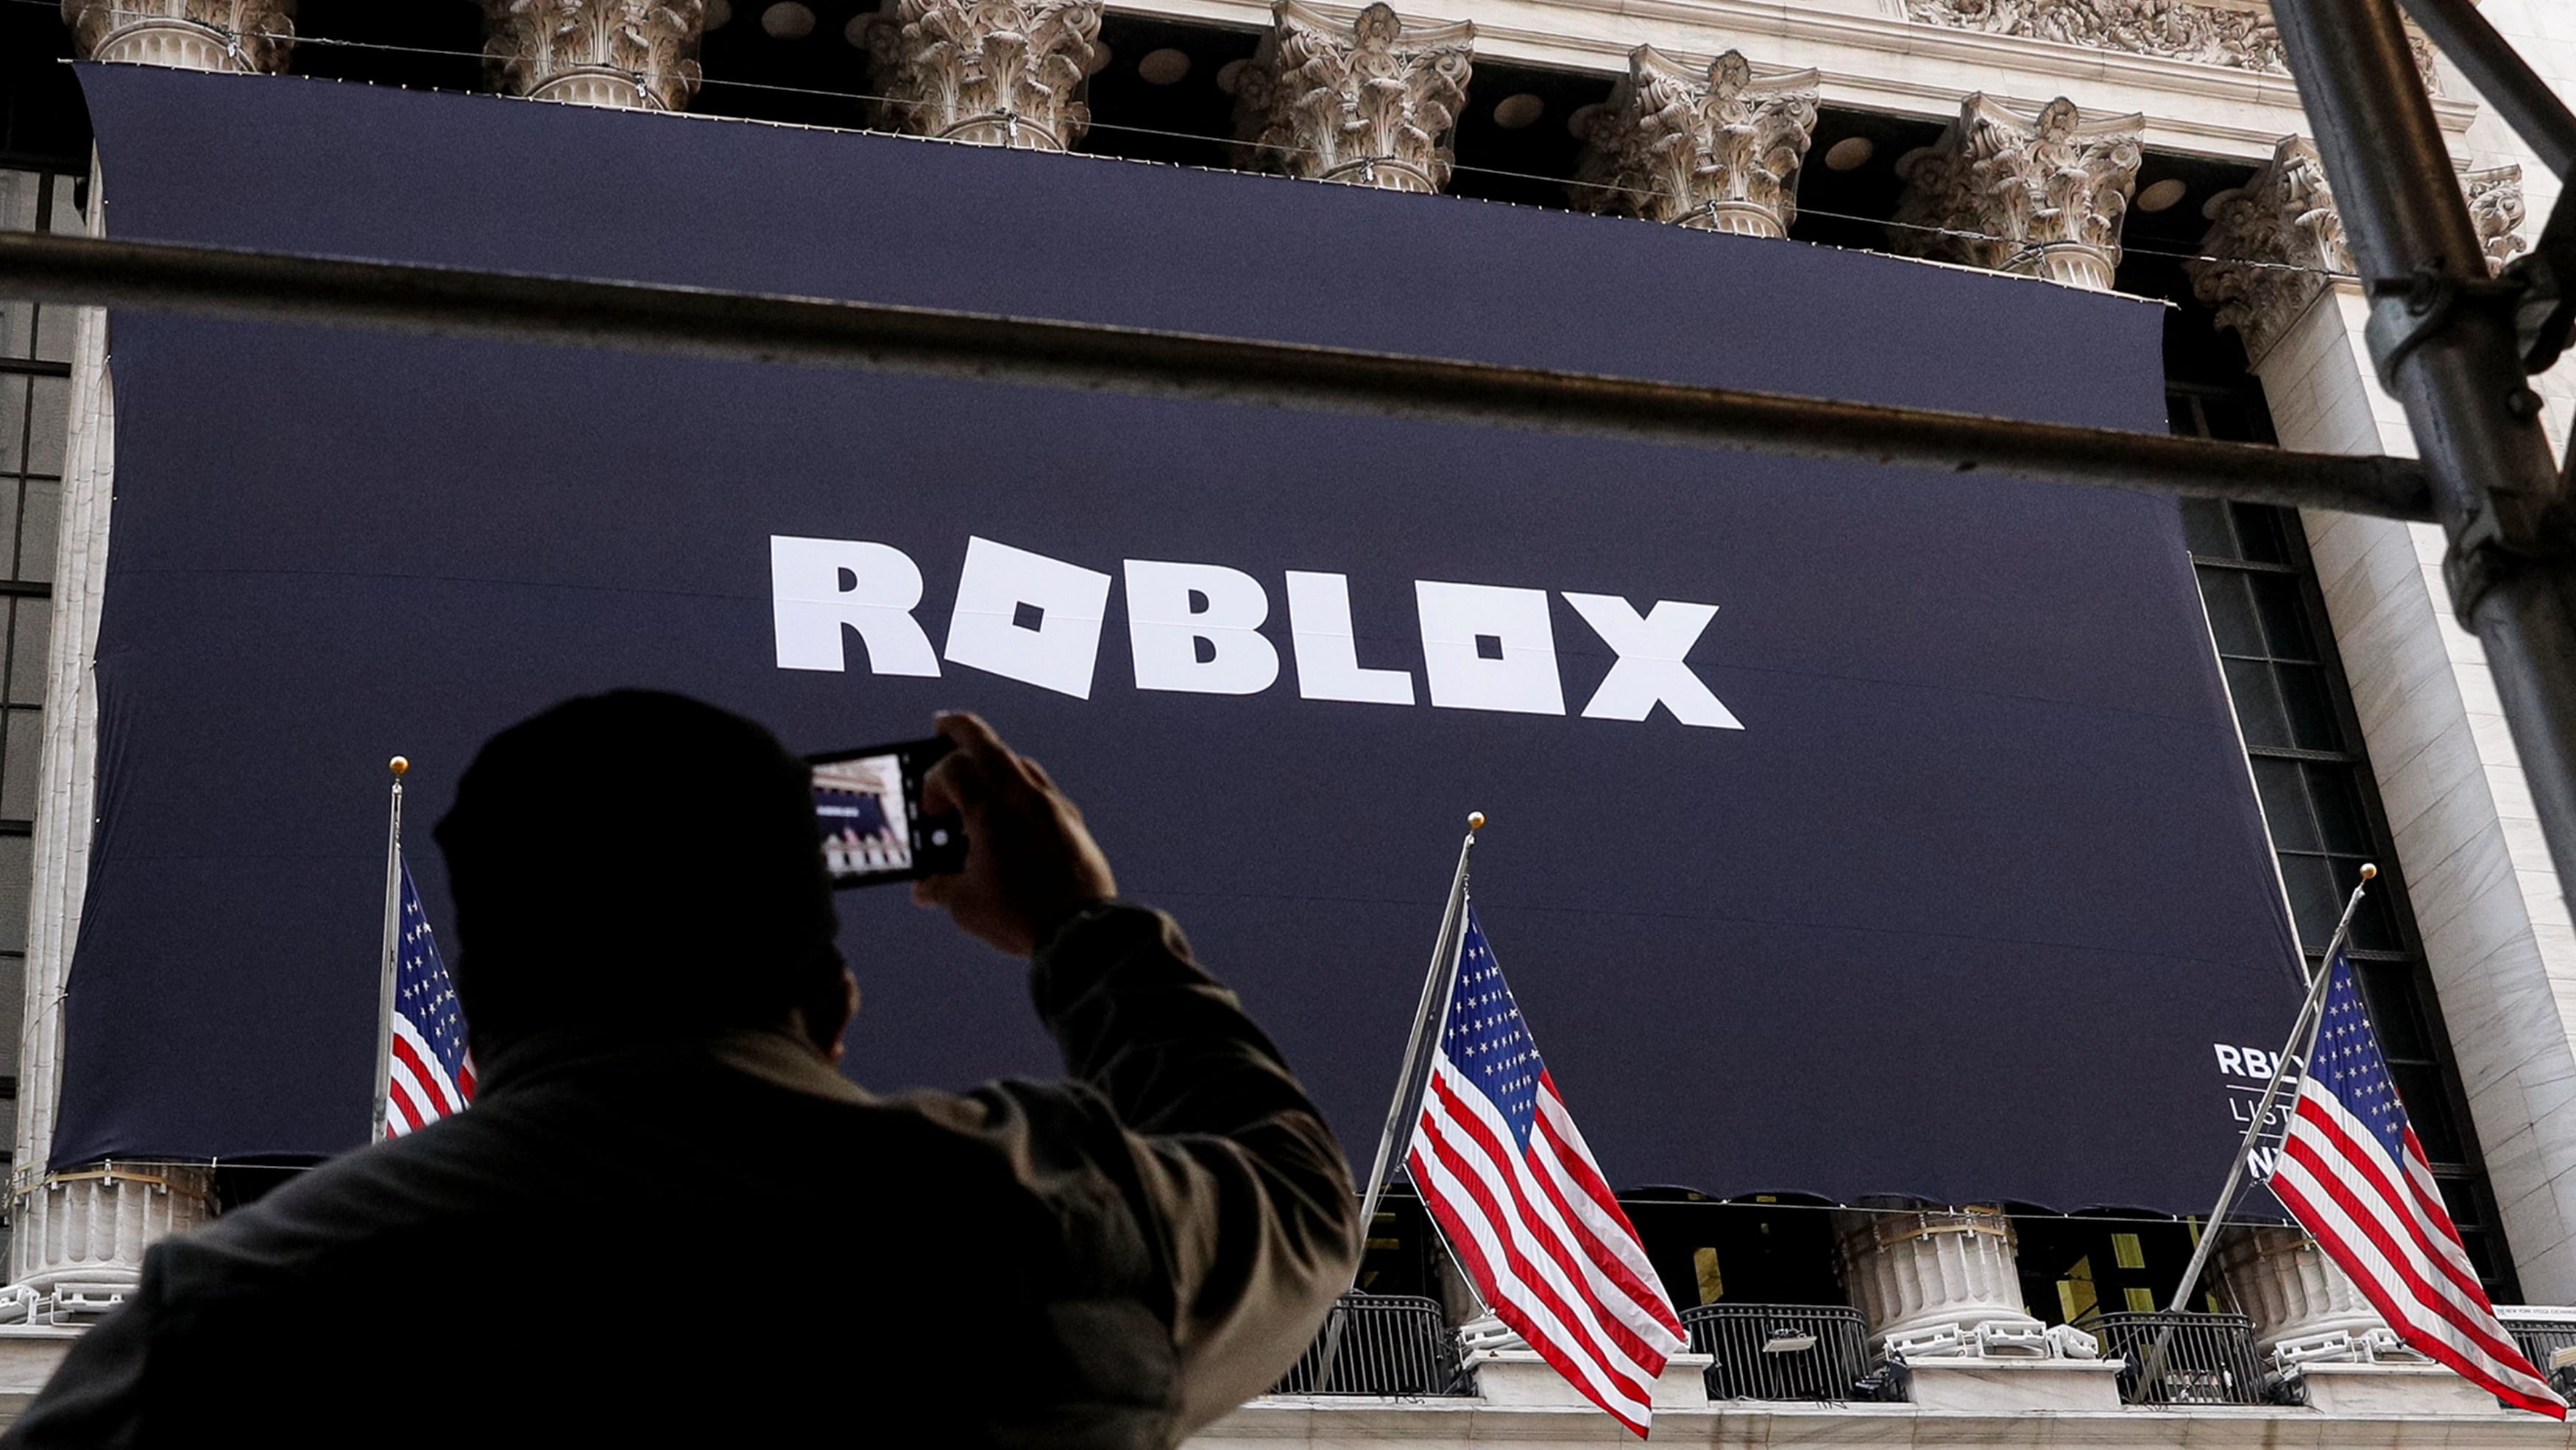 Roblox Rblx To Report Q1 Earnings What S In The Cards - roblox live right now